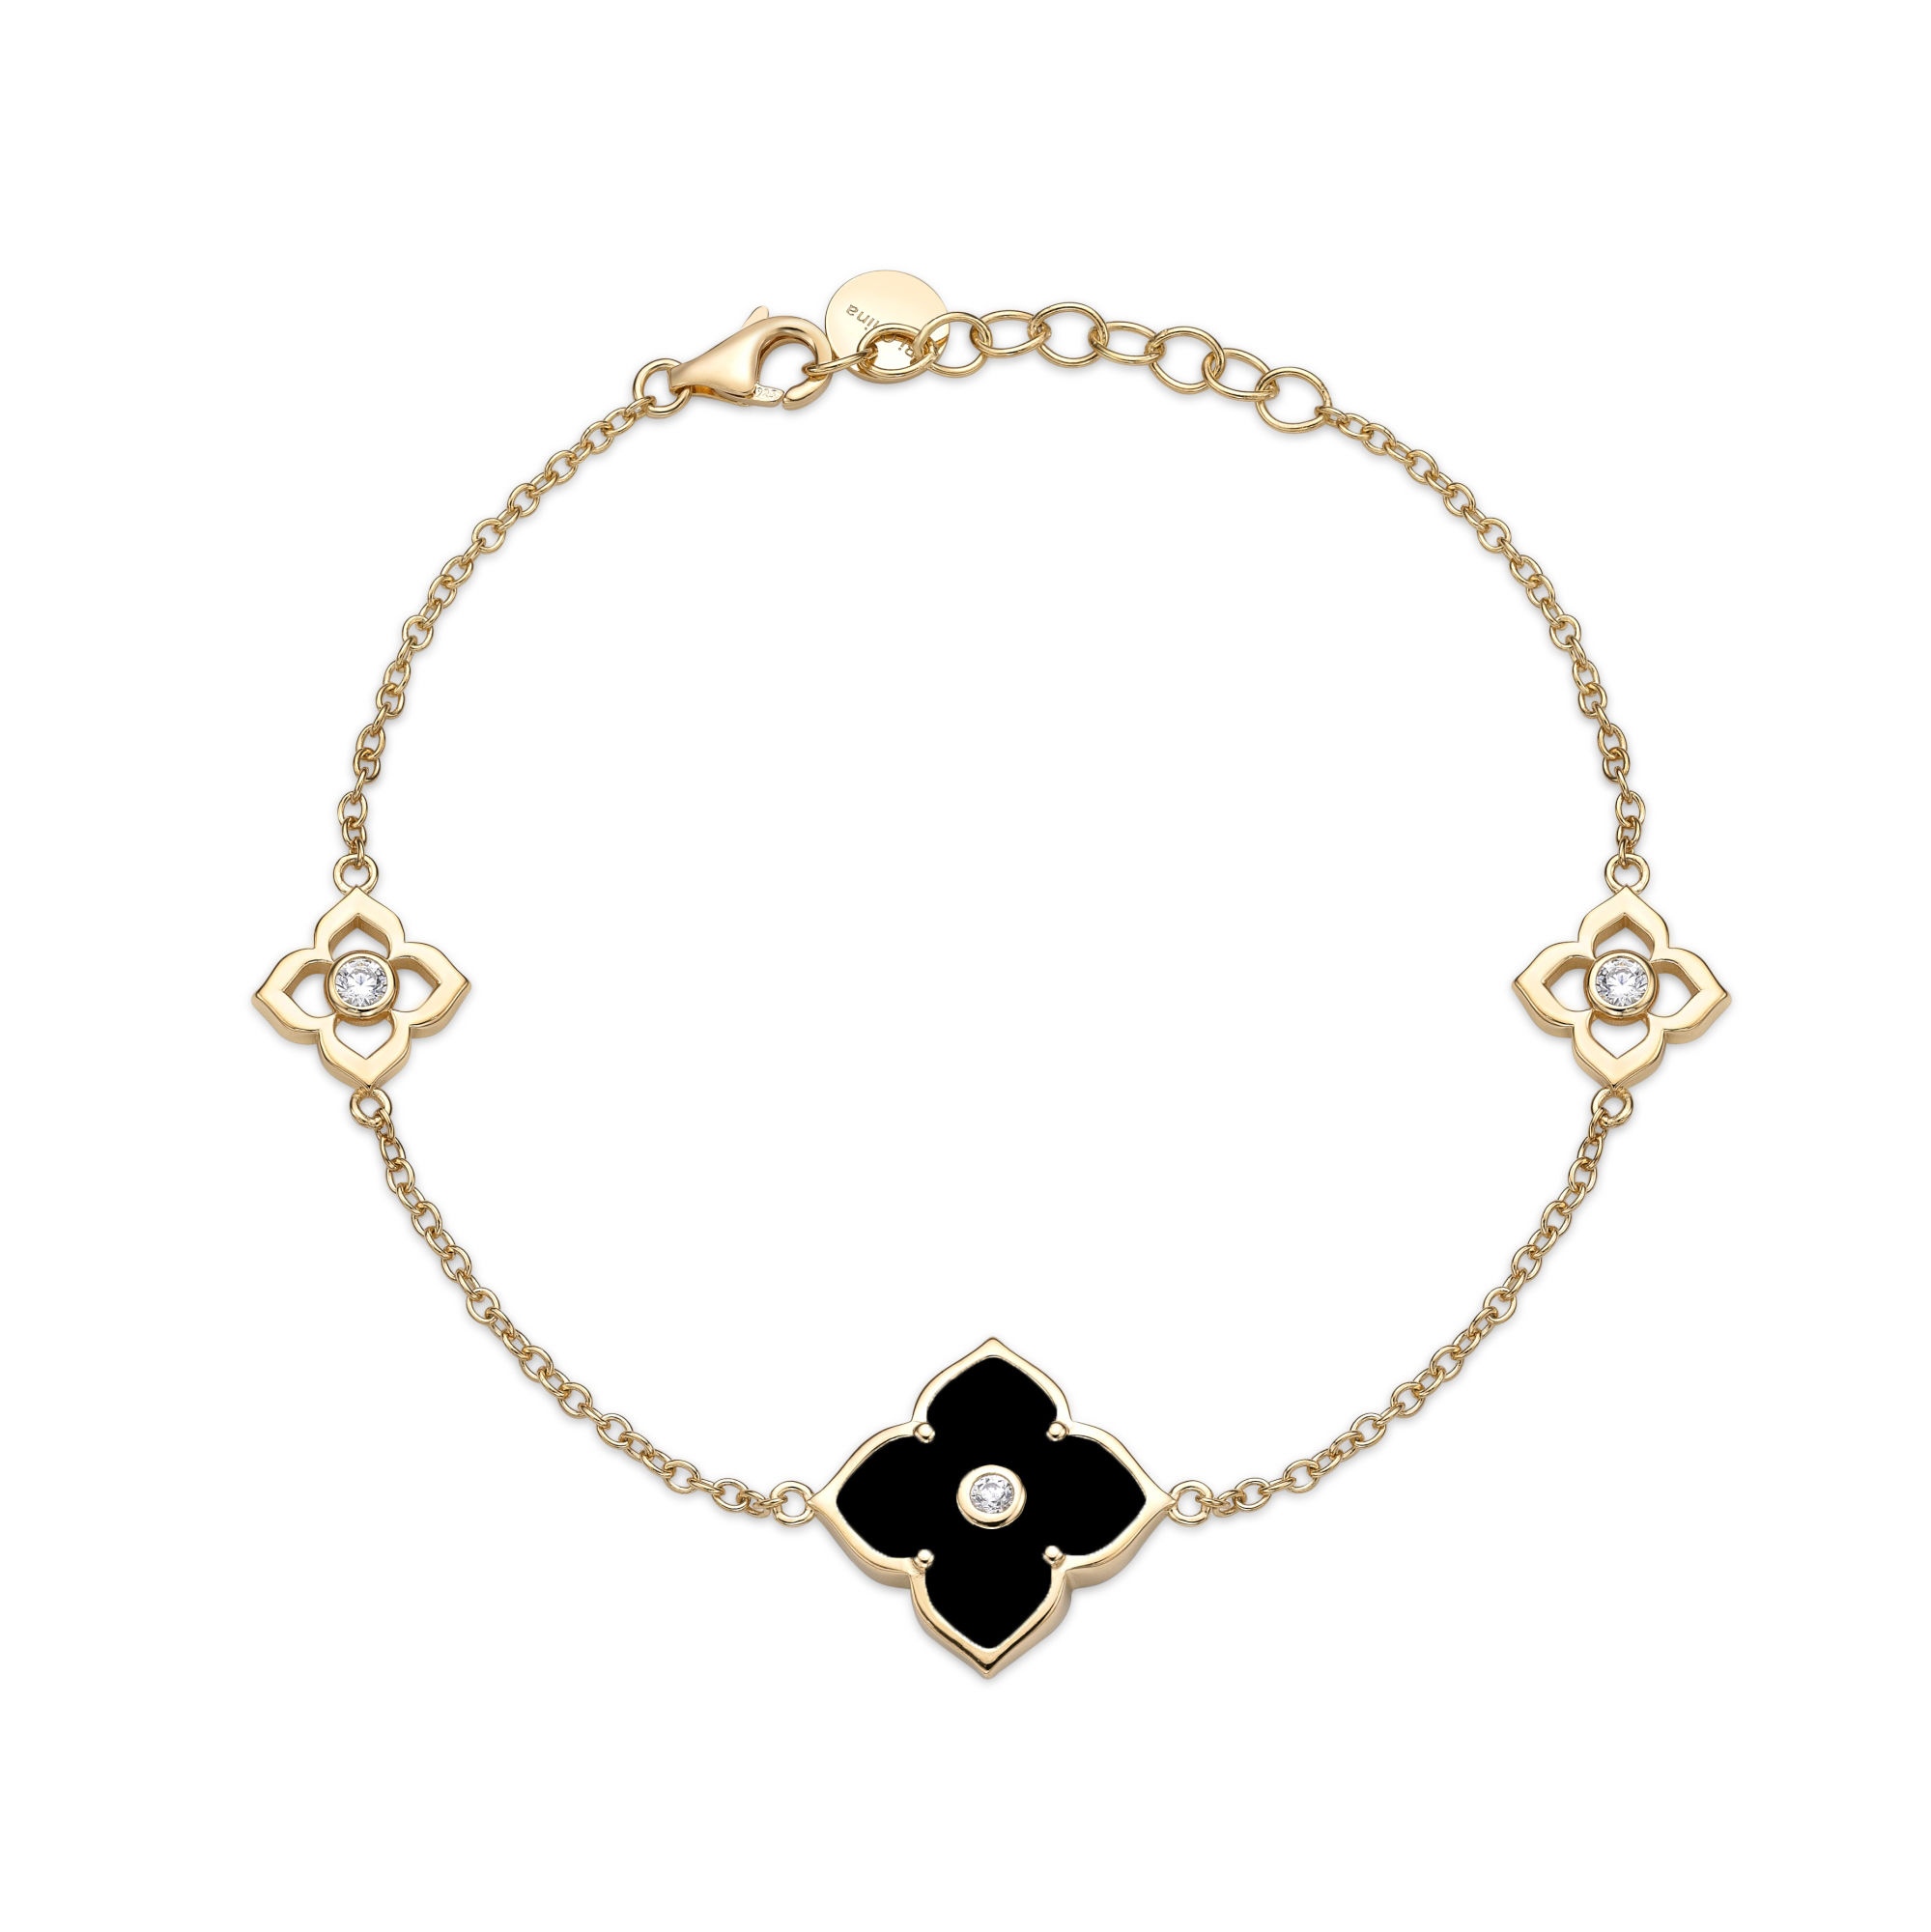 Women's Black Onyx Triple Flower Bracelet in Yellow Gold Plated Sterling Silver with Cubic Zirconia - 7-8 Inch Adjsutable Cable Chain - Flora | Lavari Jewelers